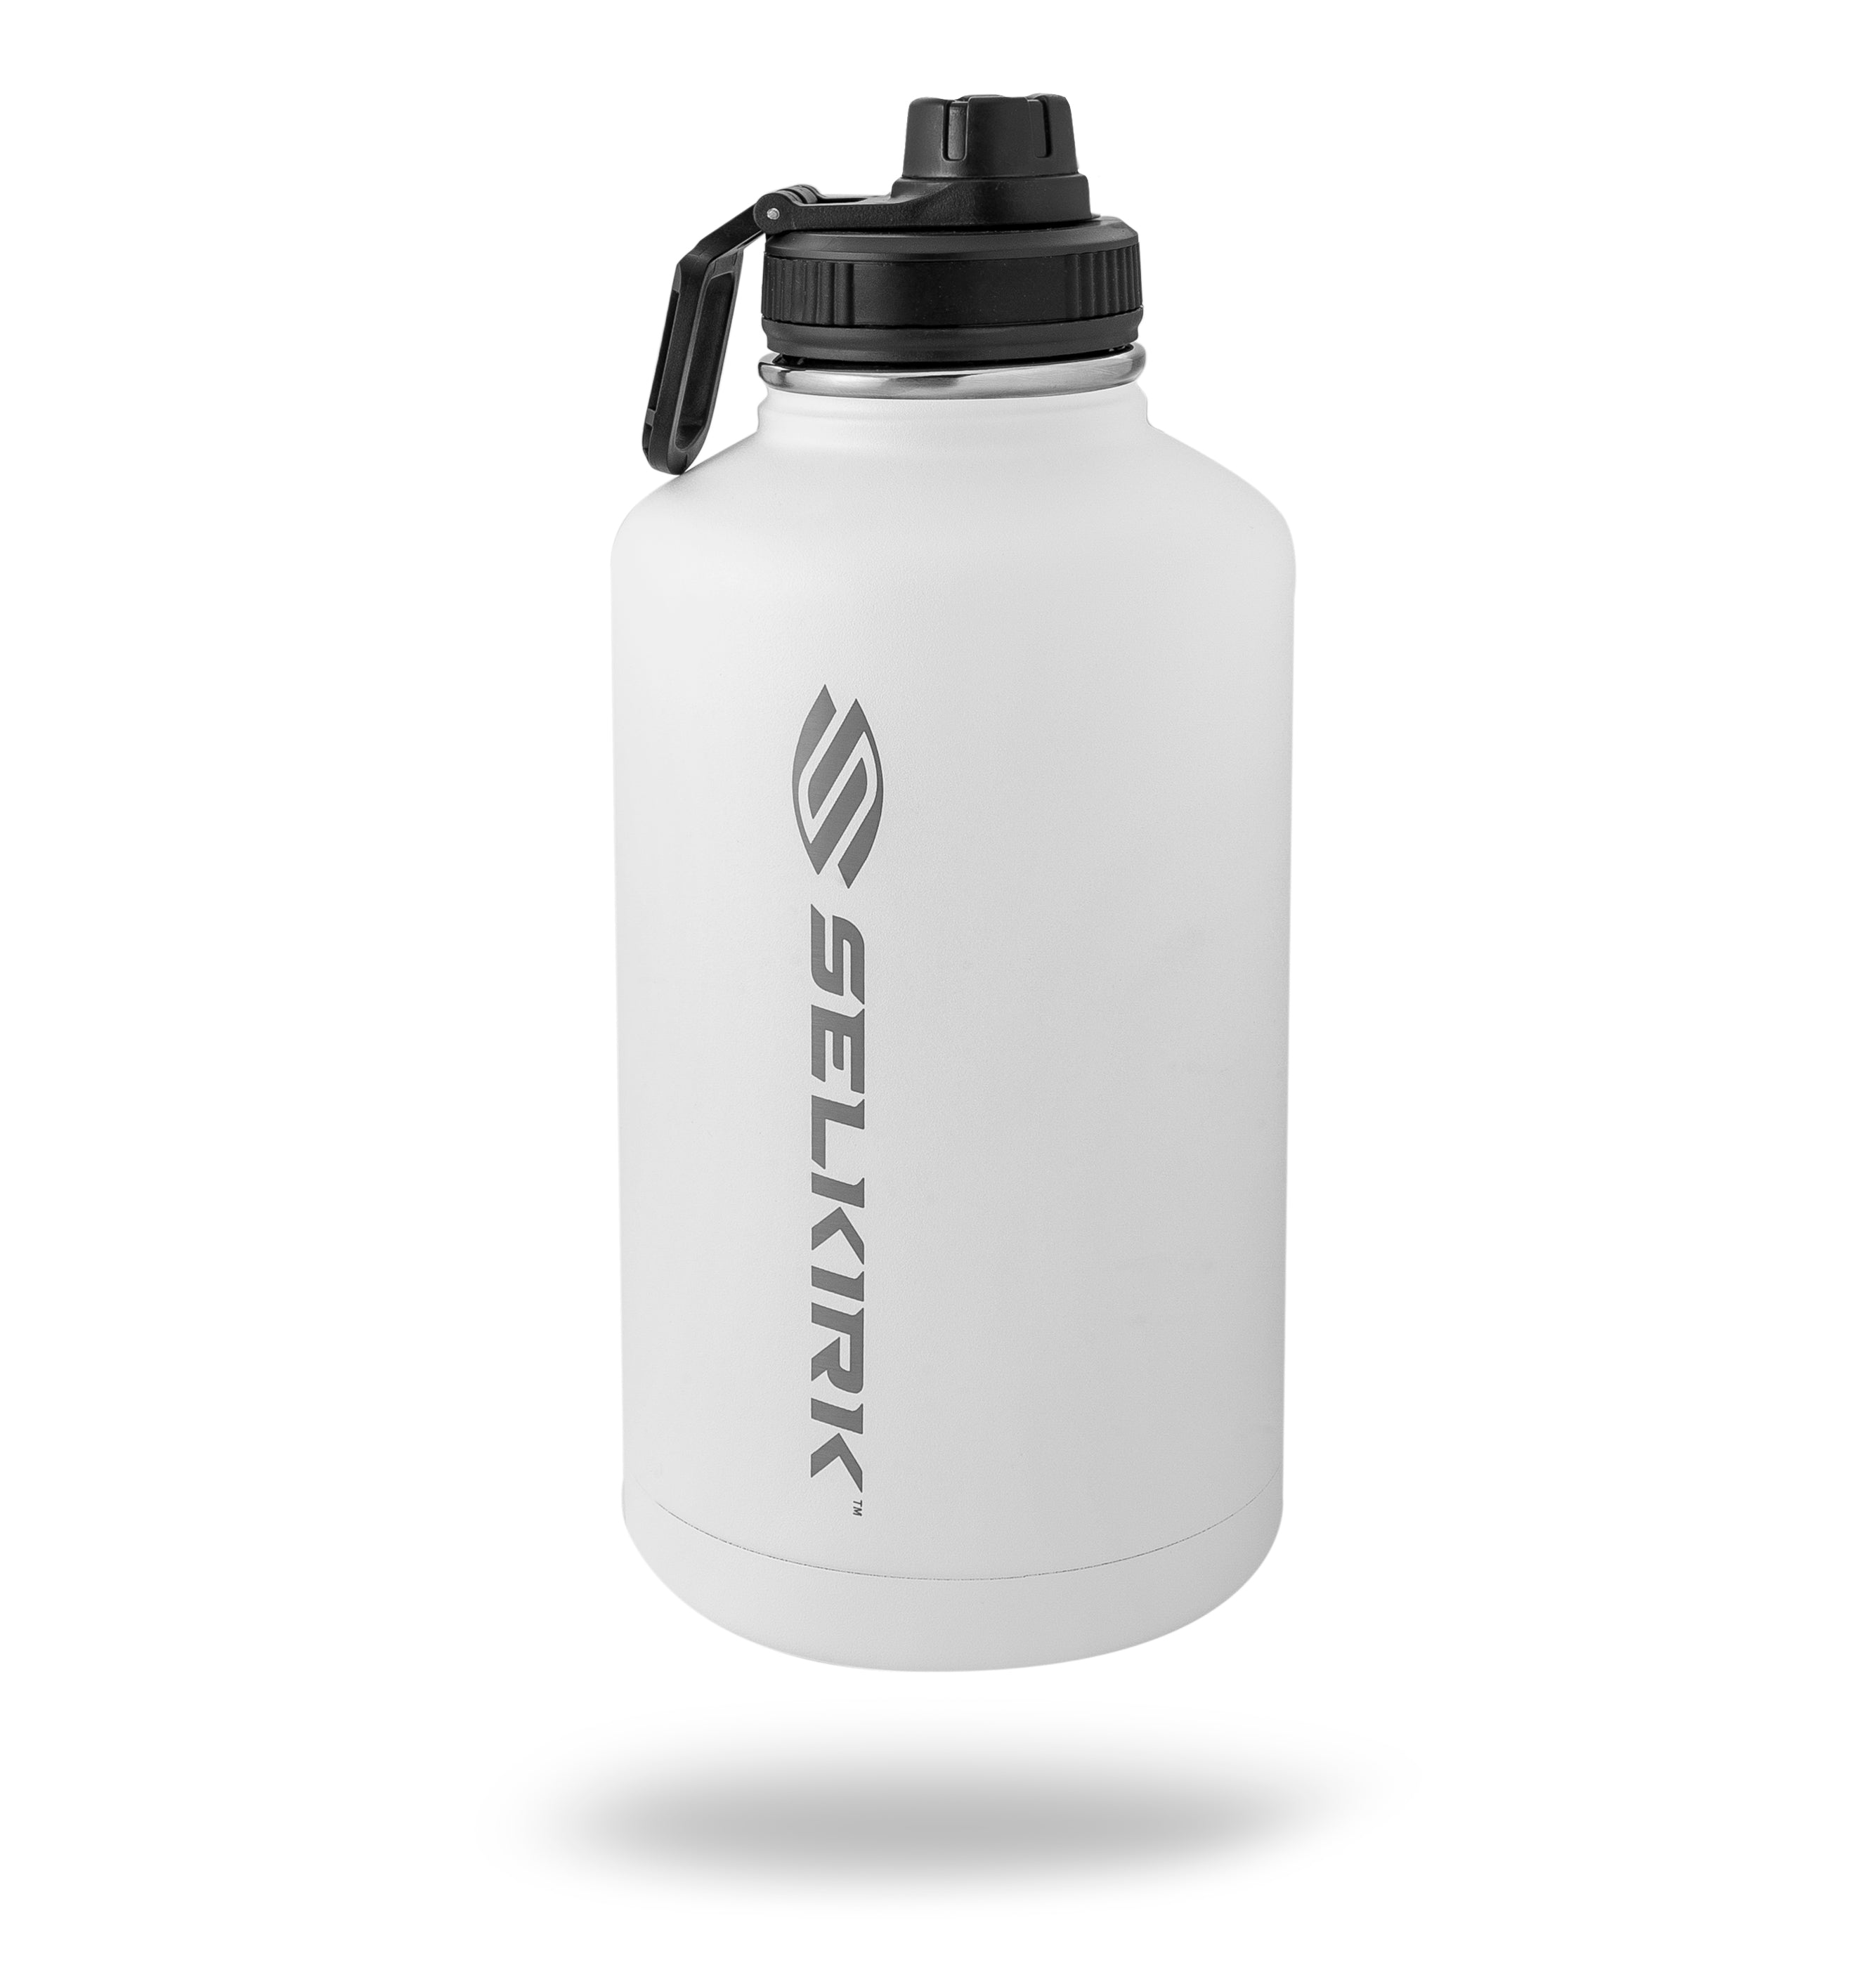 Black Insulated Squeeze Bottle (30 oz)